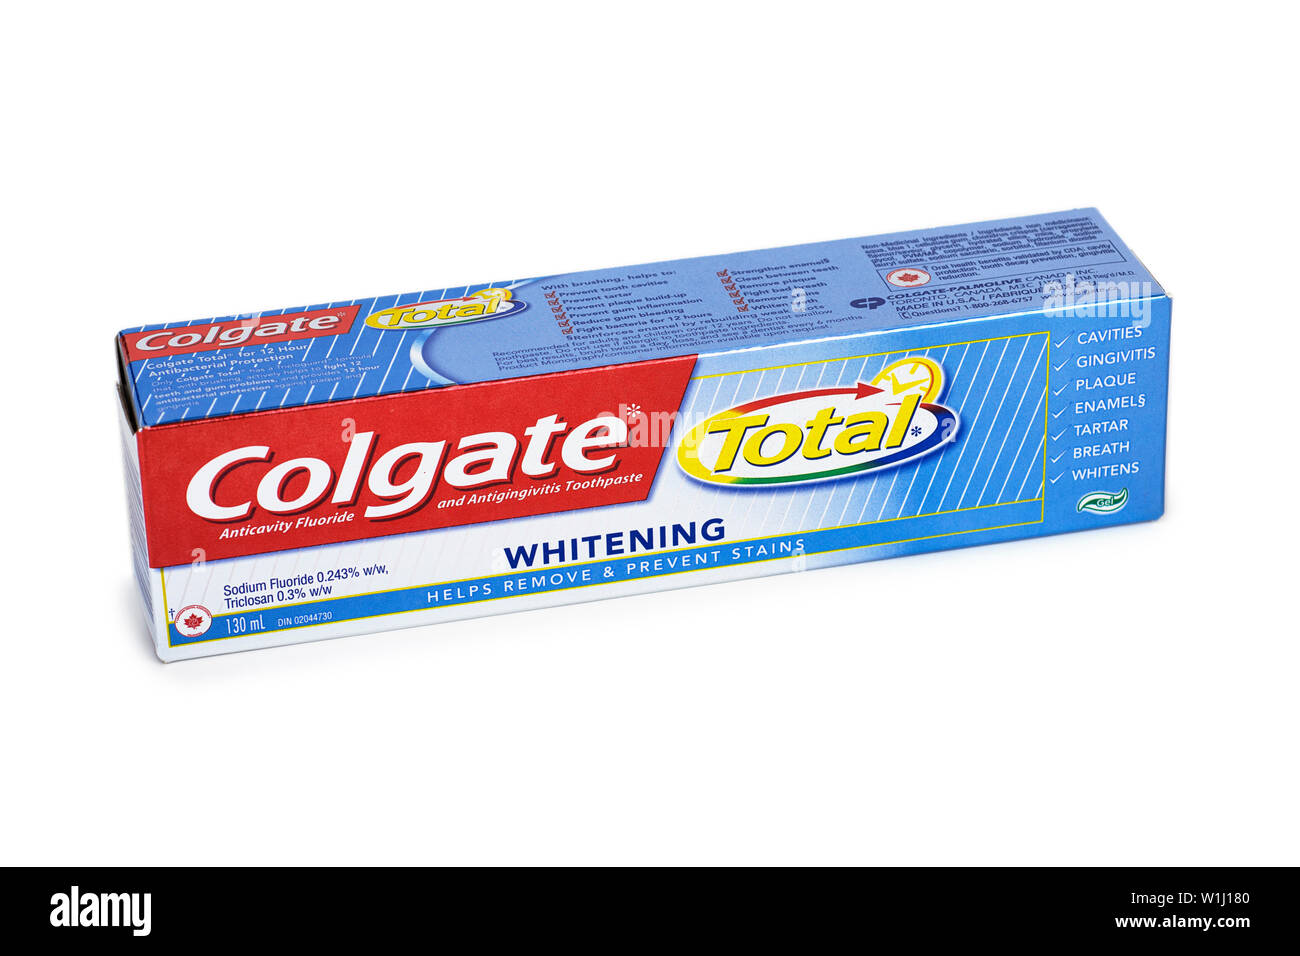 Colgate Whitening Toothpaste, Tube, Package Stock Photo